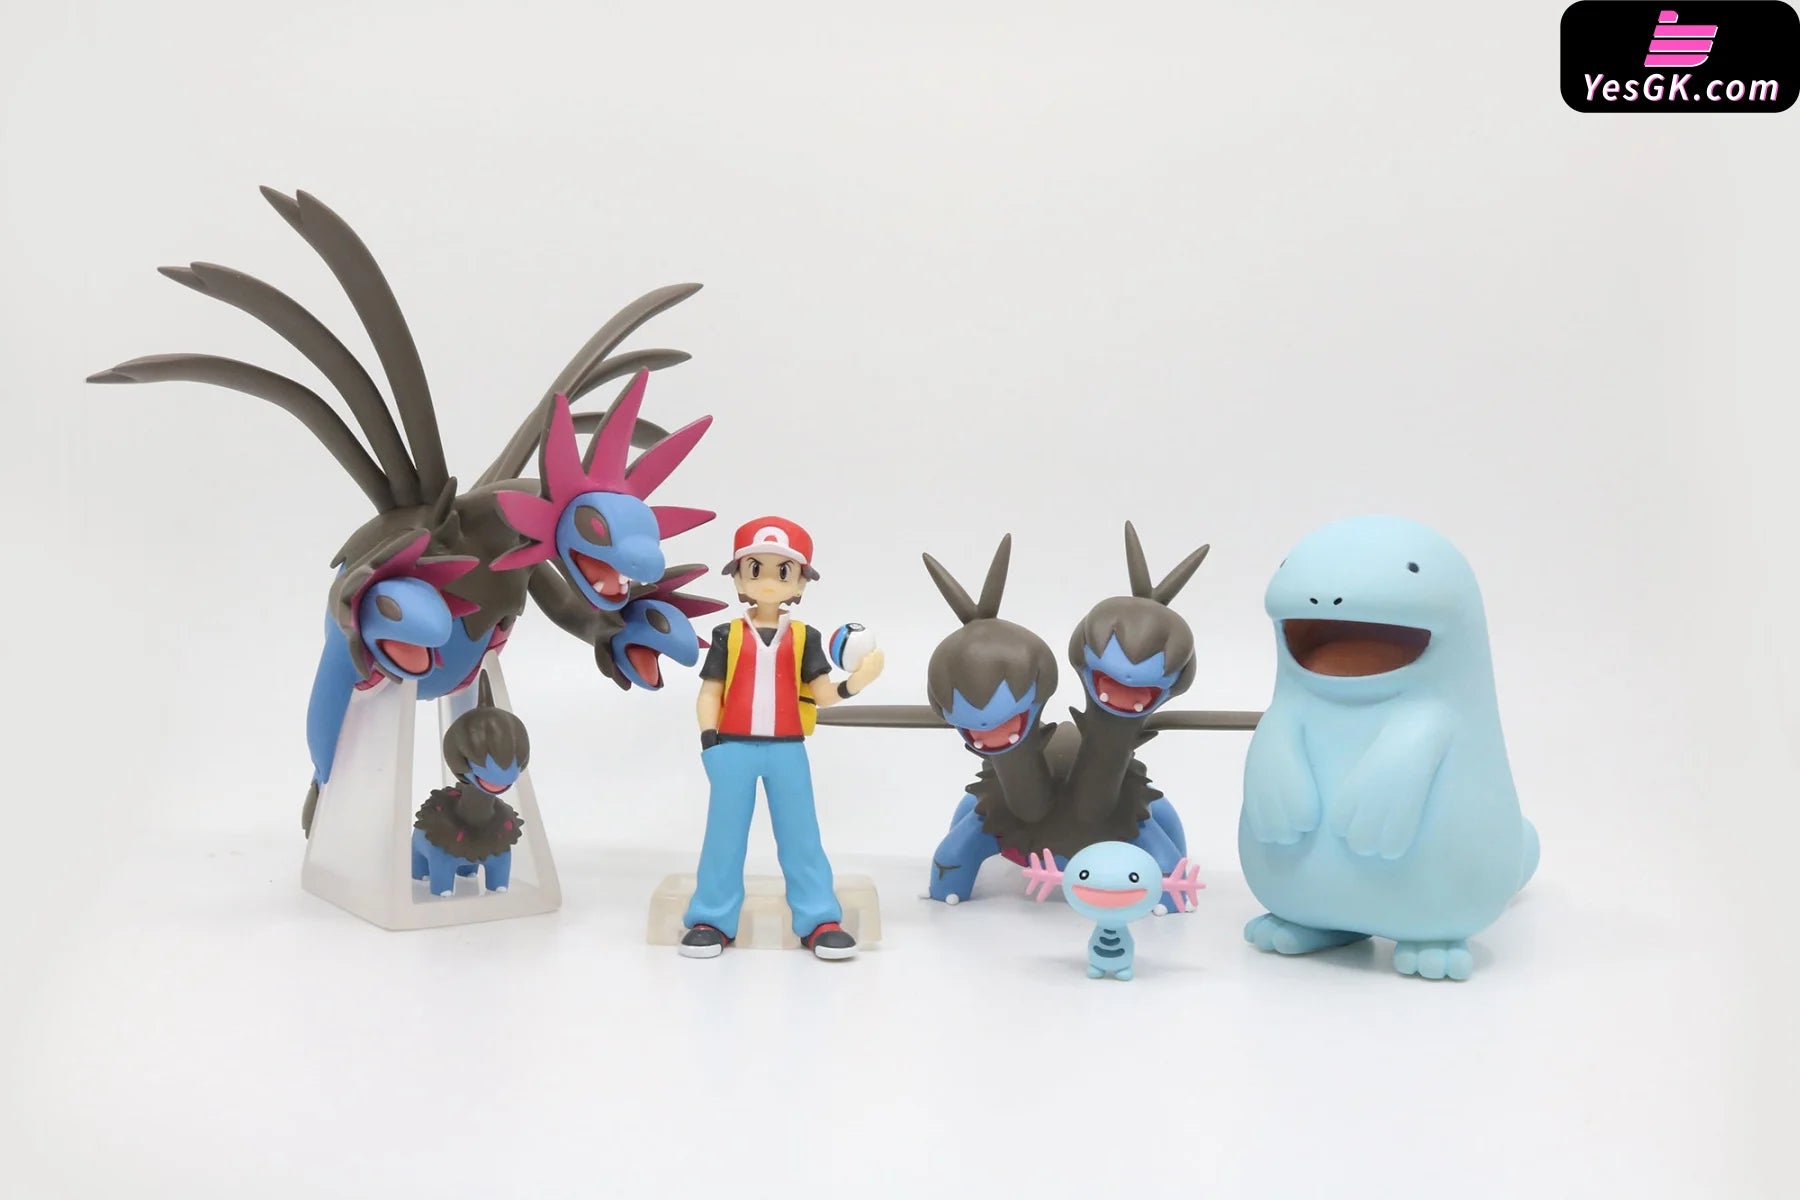 Hydreigon figure by GX Studio and PcHouse now available for preorder!  #pokemon #pokemonfigure #pokemonstatue #hydreigon #hydreigonfigure